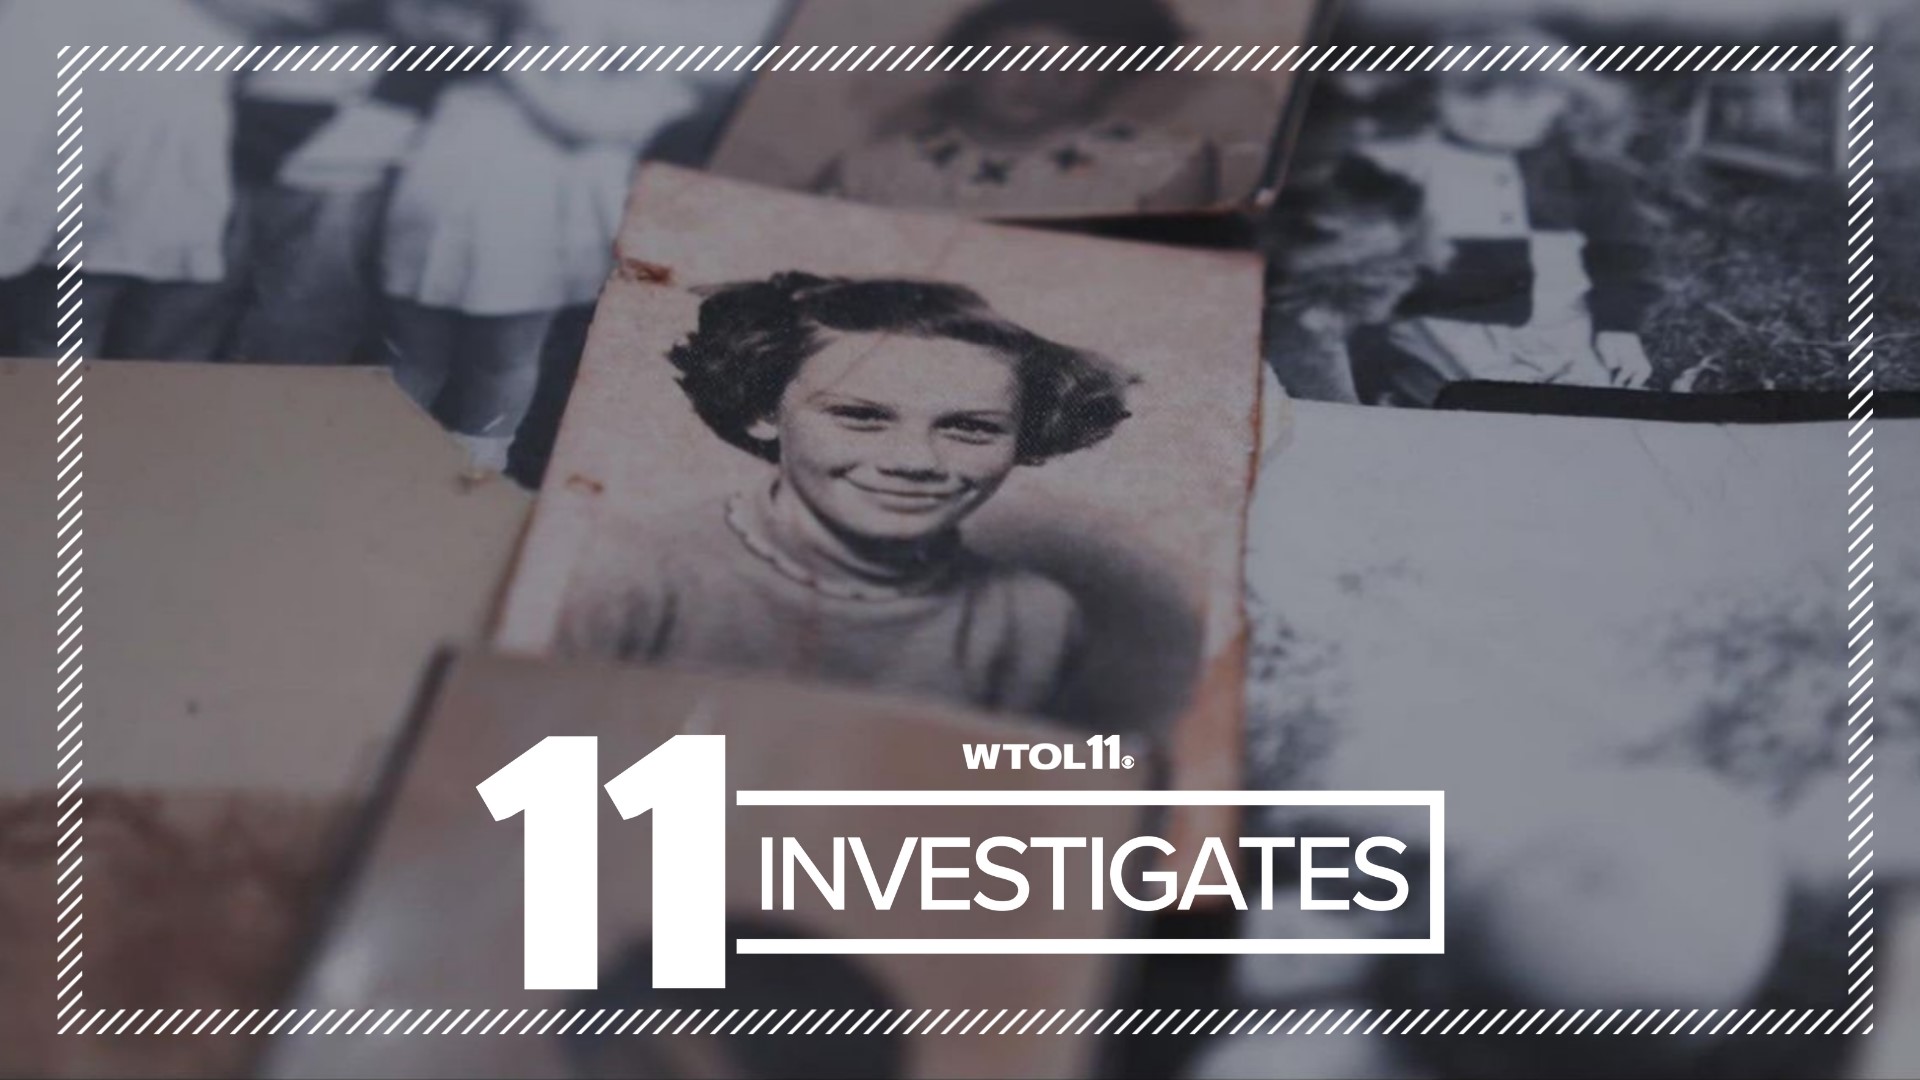 Uncovered has the largest cold case database in the country – more than 50,000 cases - and they have been instrumental in helping the WTOL 11 Investigates team.